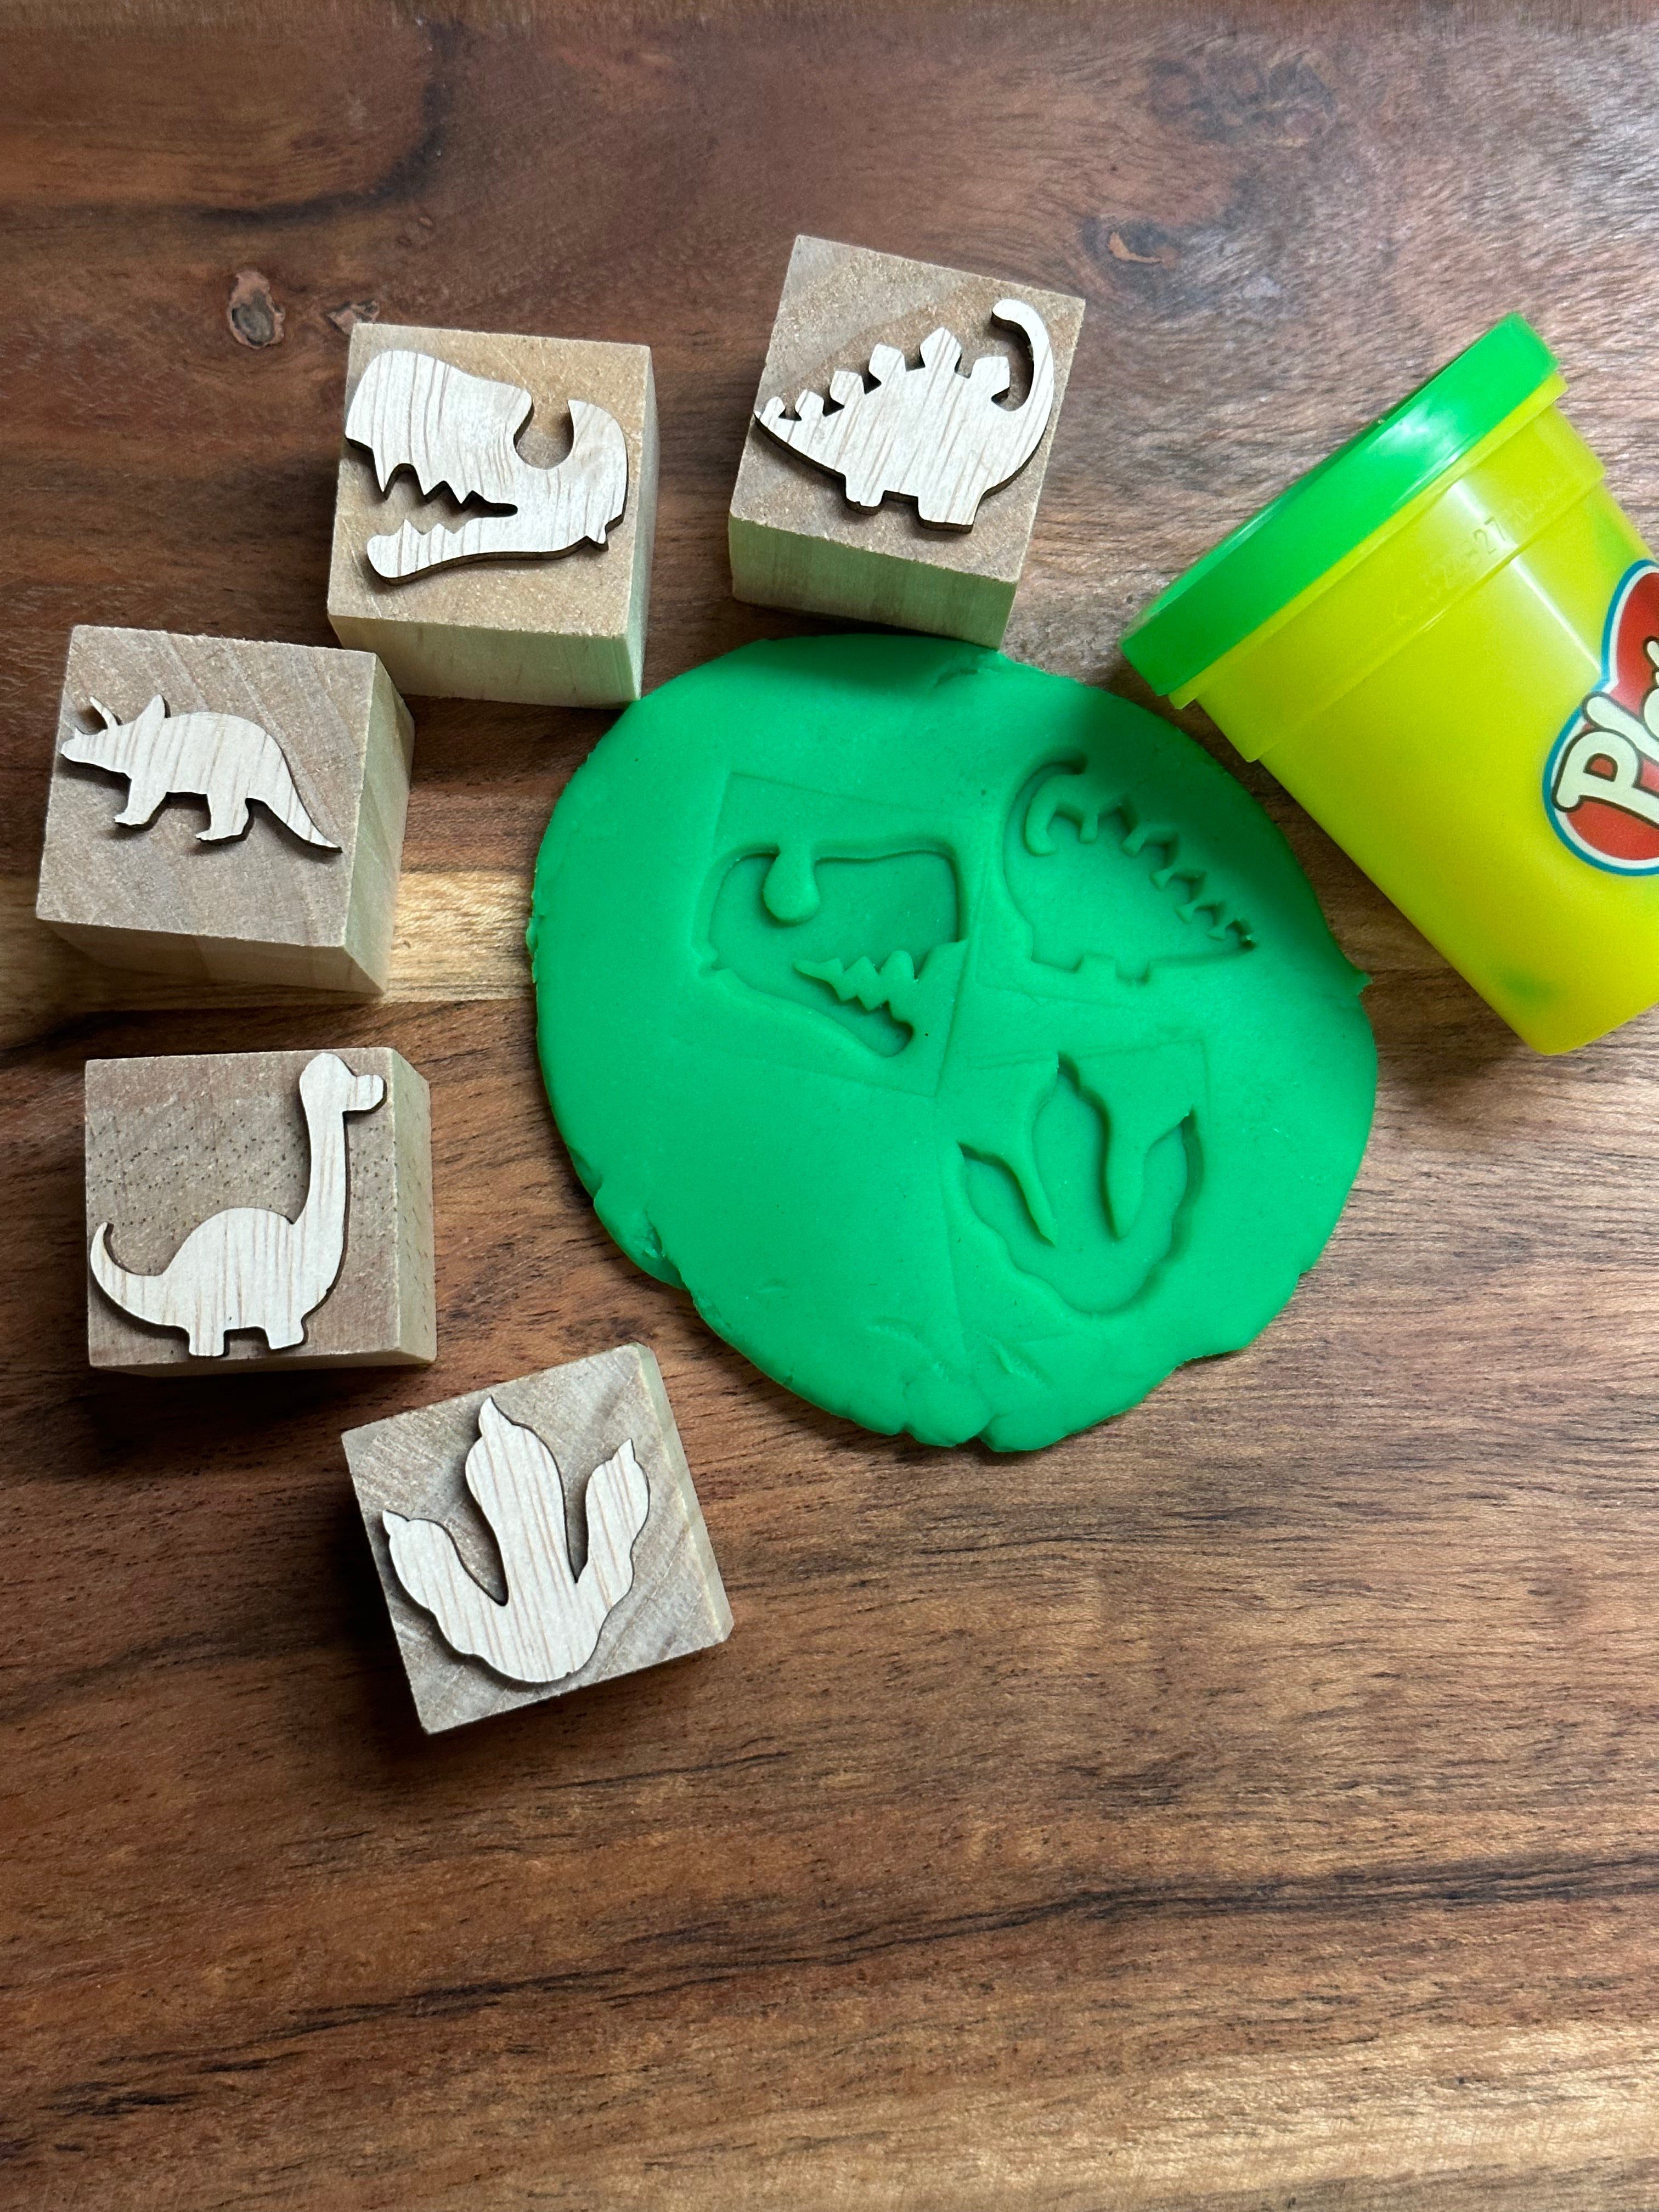 Play Doh Stamps - Budget Friendly